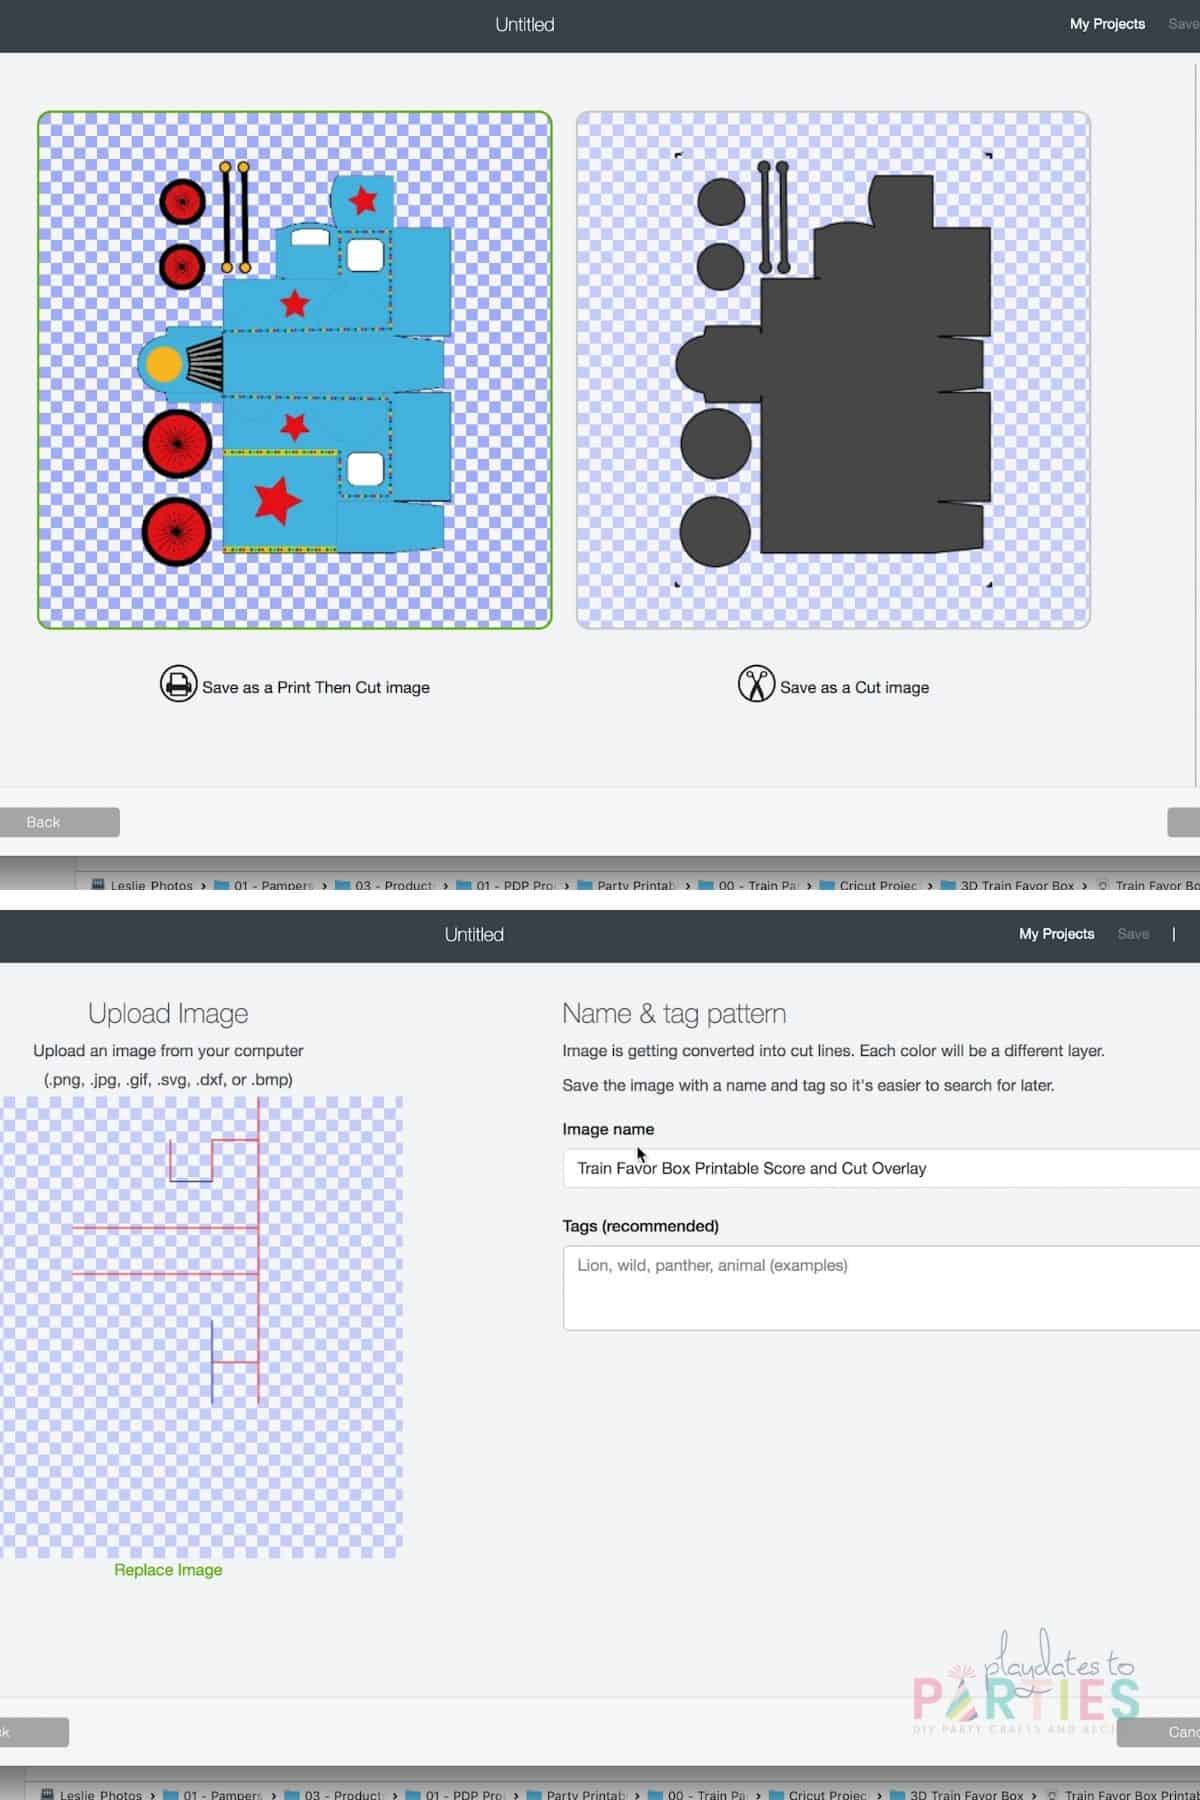 collage showing the upload screens in Cricut Design Space for a Print then Cut and an SVG file